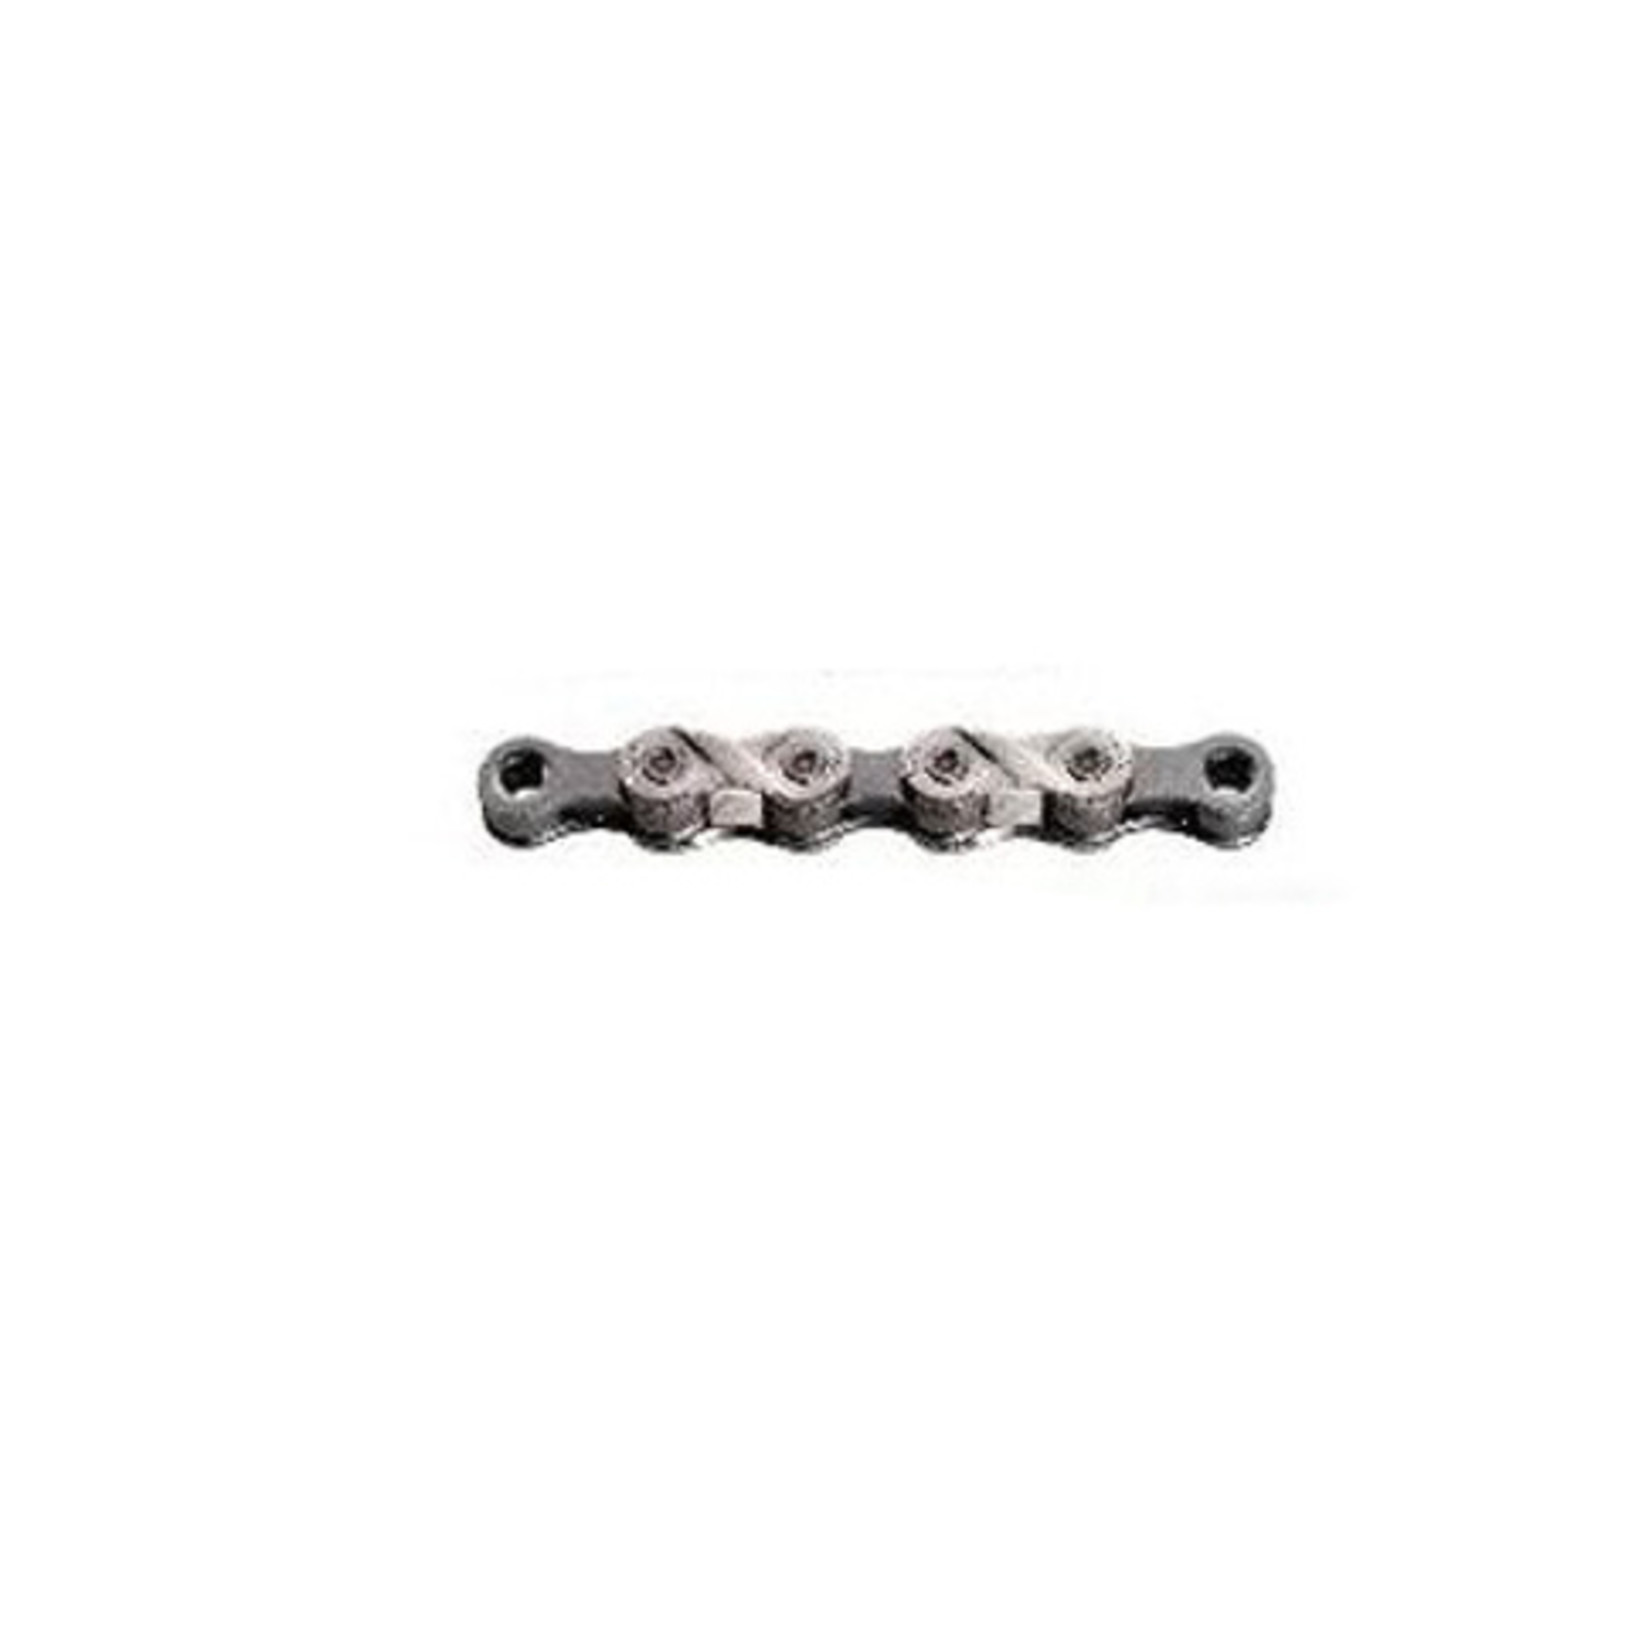 KMC KMC Bike Chain - X8.93 - 1/2" X 3/32" X 116 Links With Connector - Silver/Gray